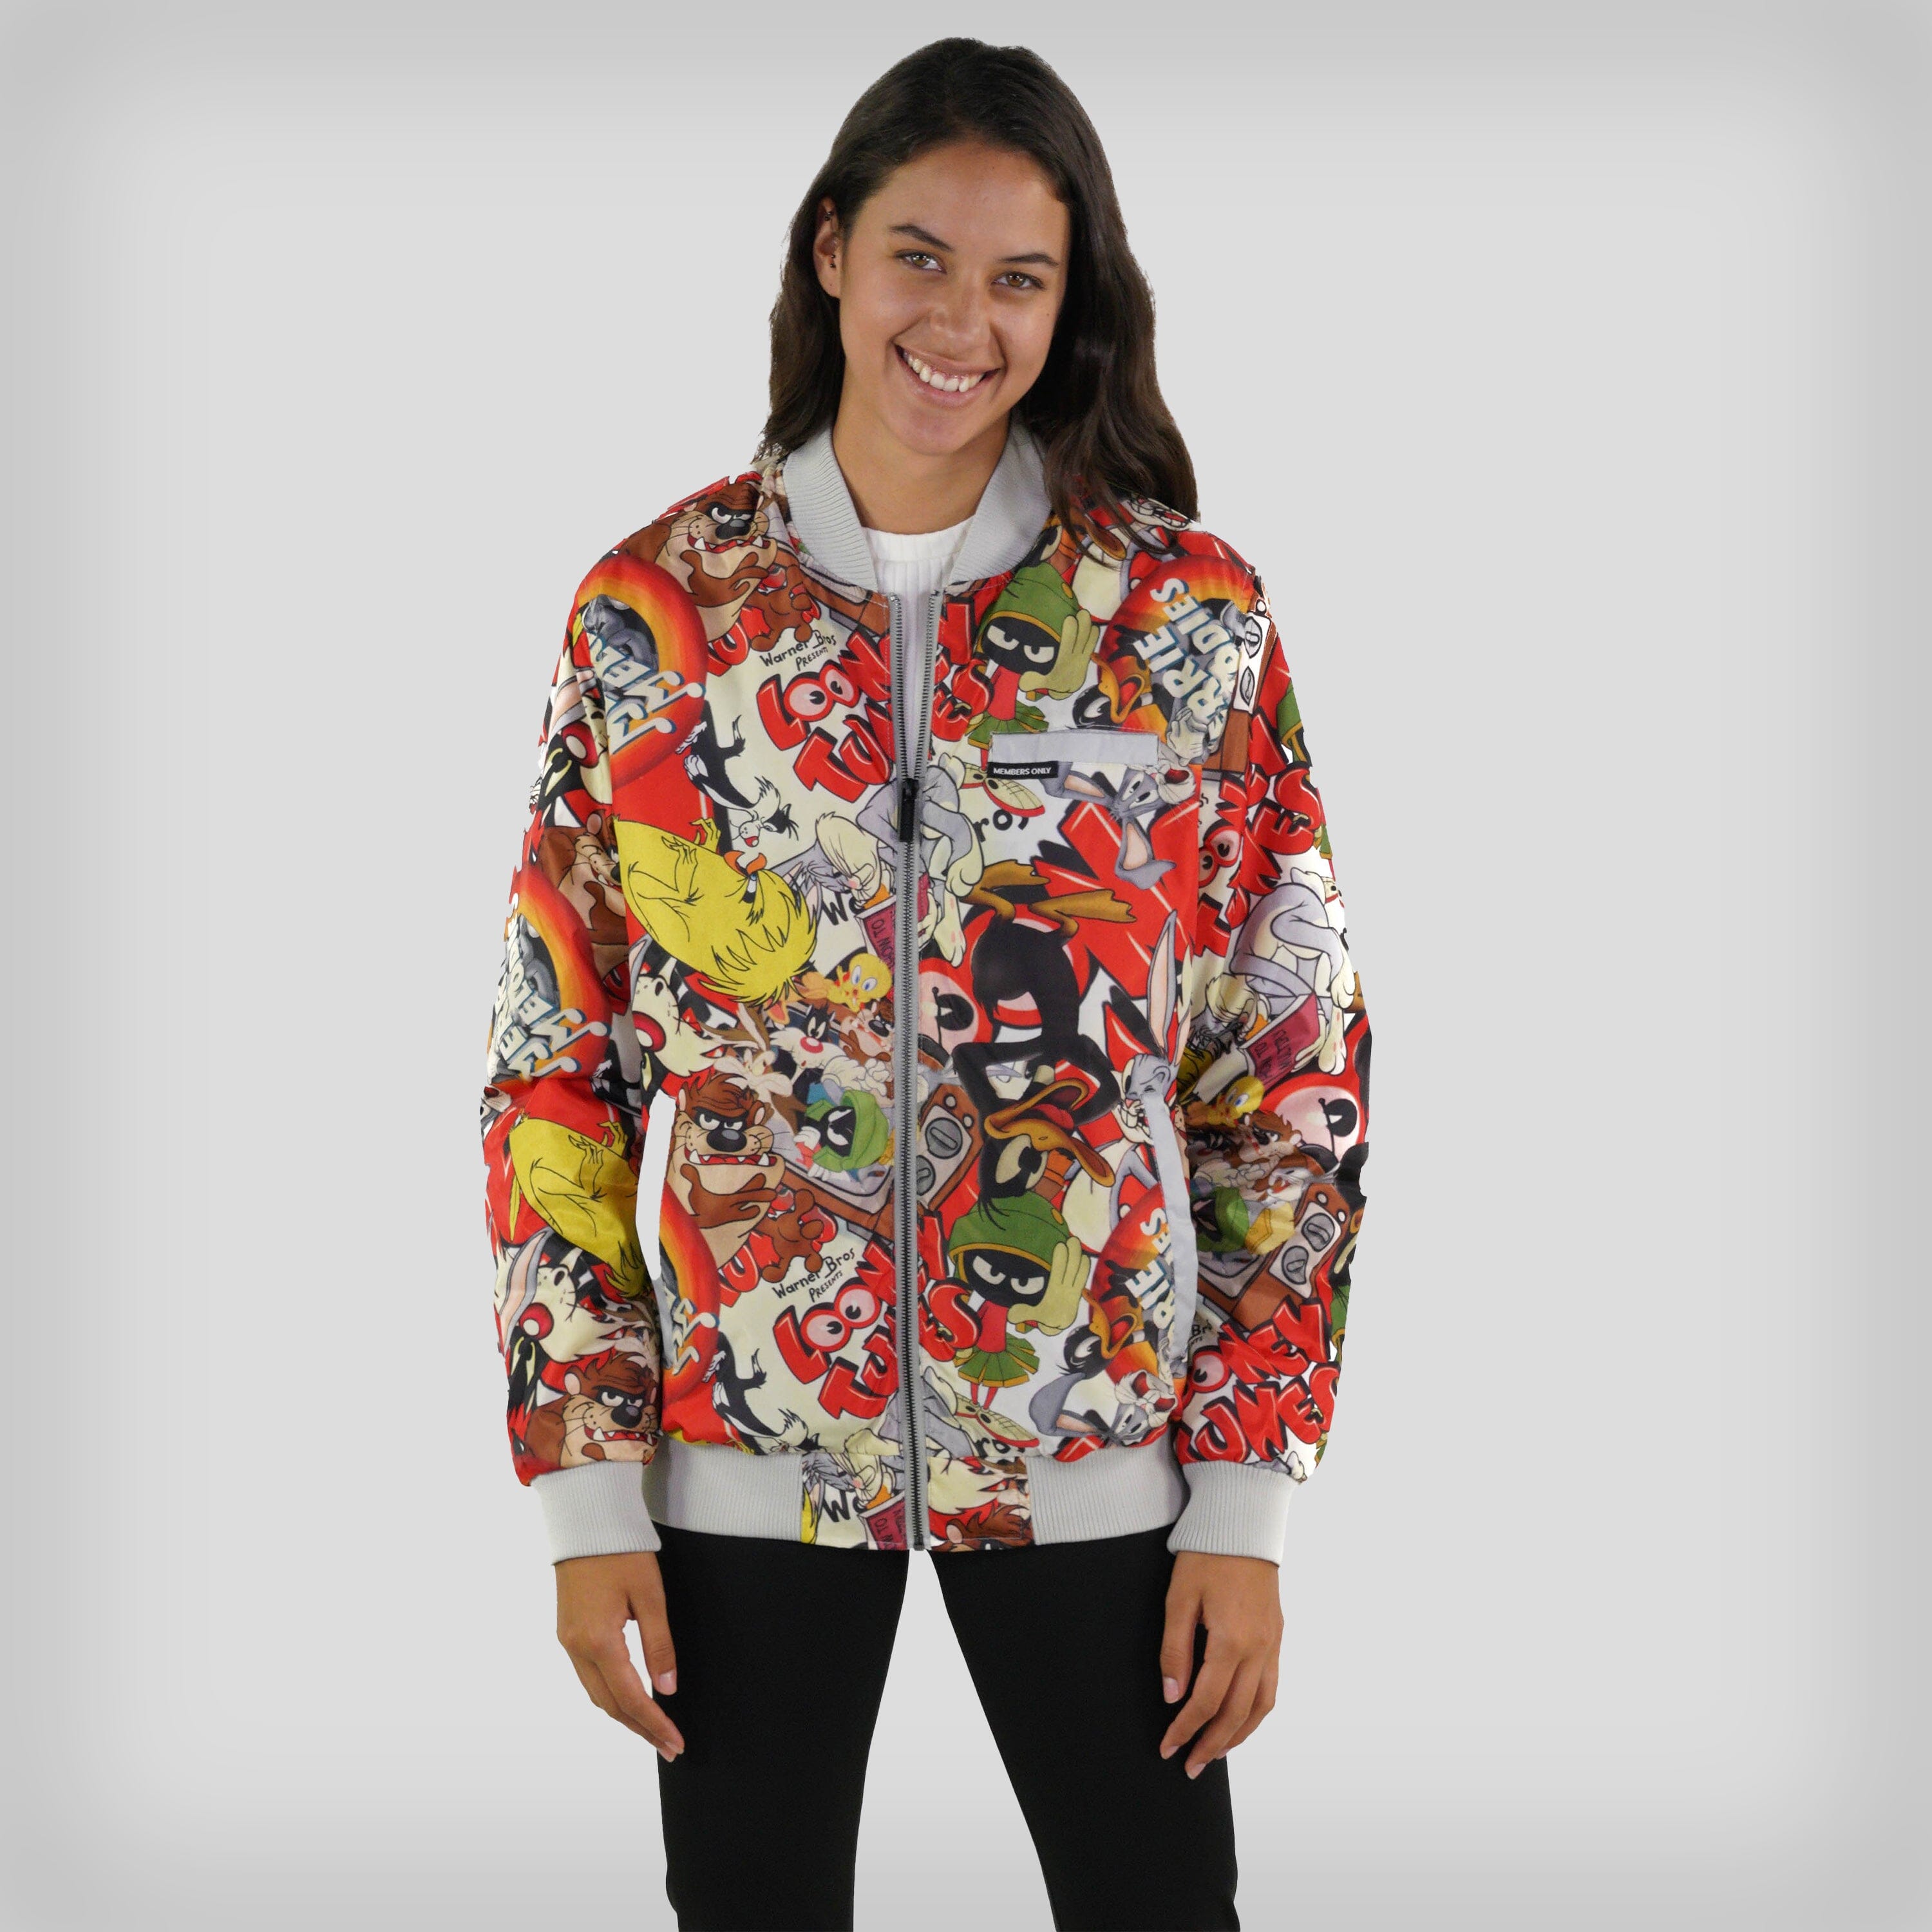 Women's Looney Tunes Vintage Mash Print Oversized Jacket - FINAL SALE Womens Jacket Members Only SILVER Small 